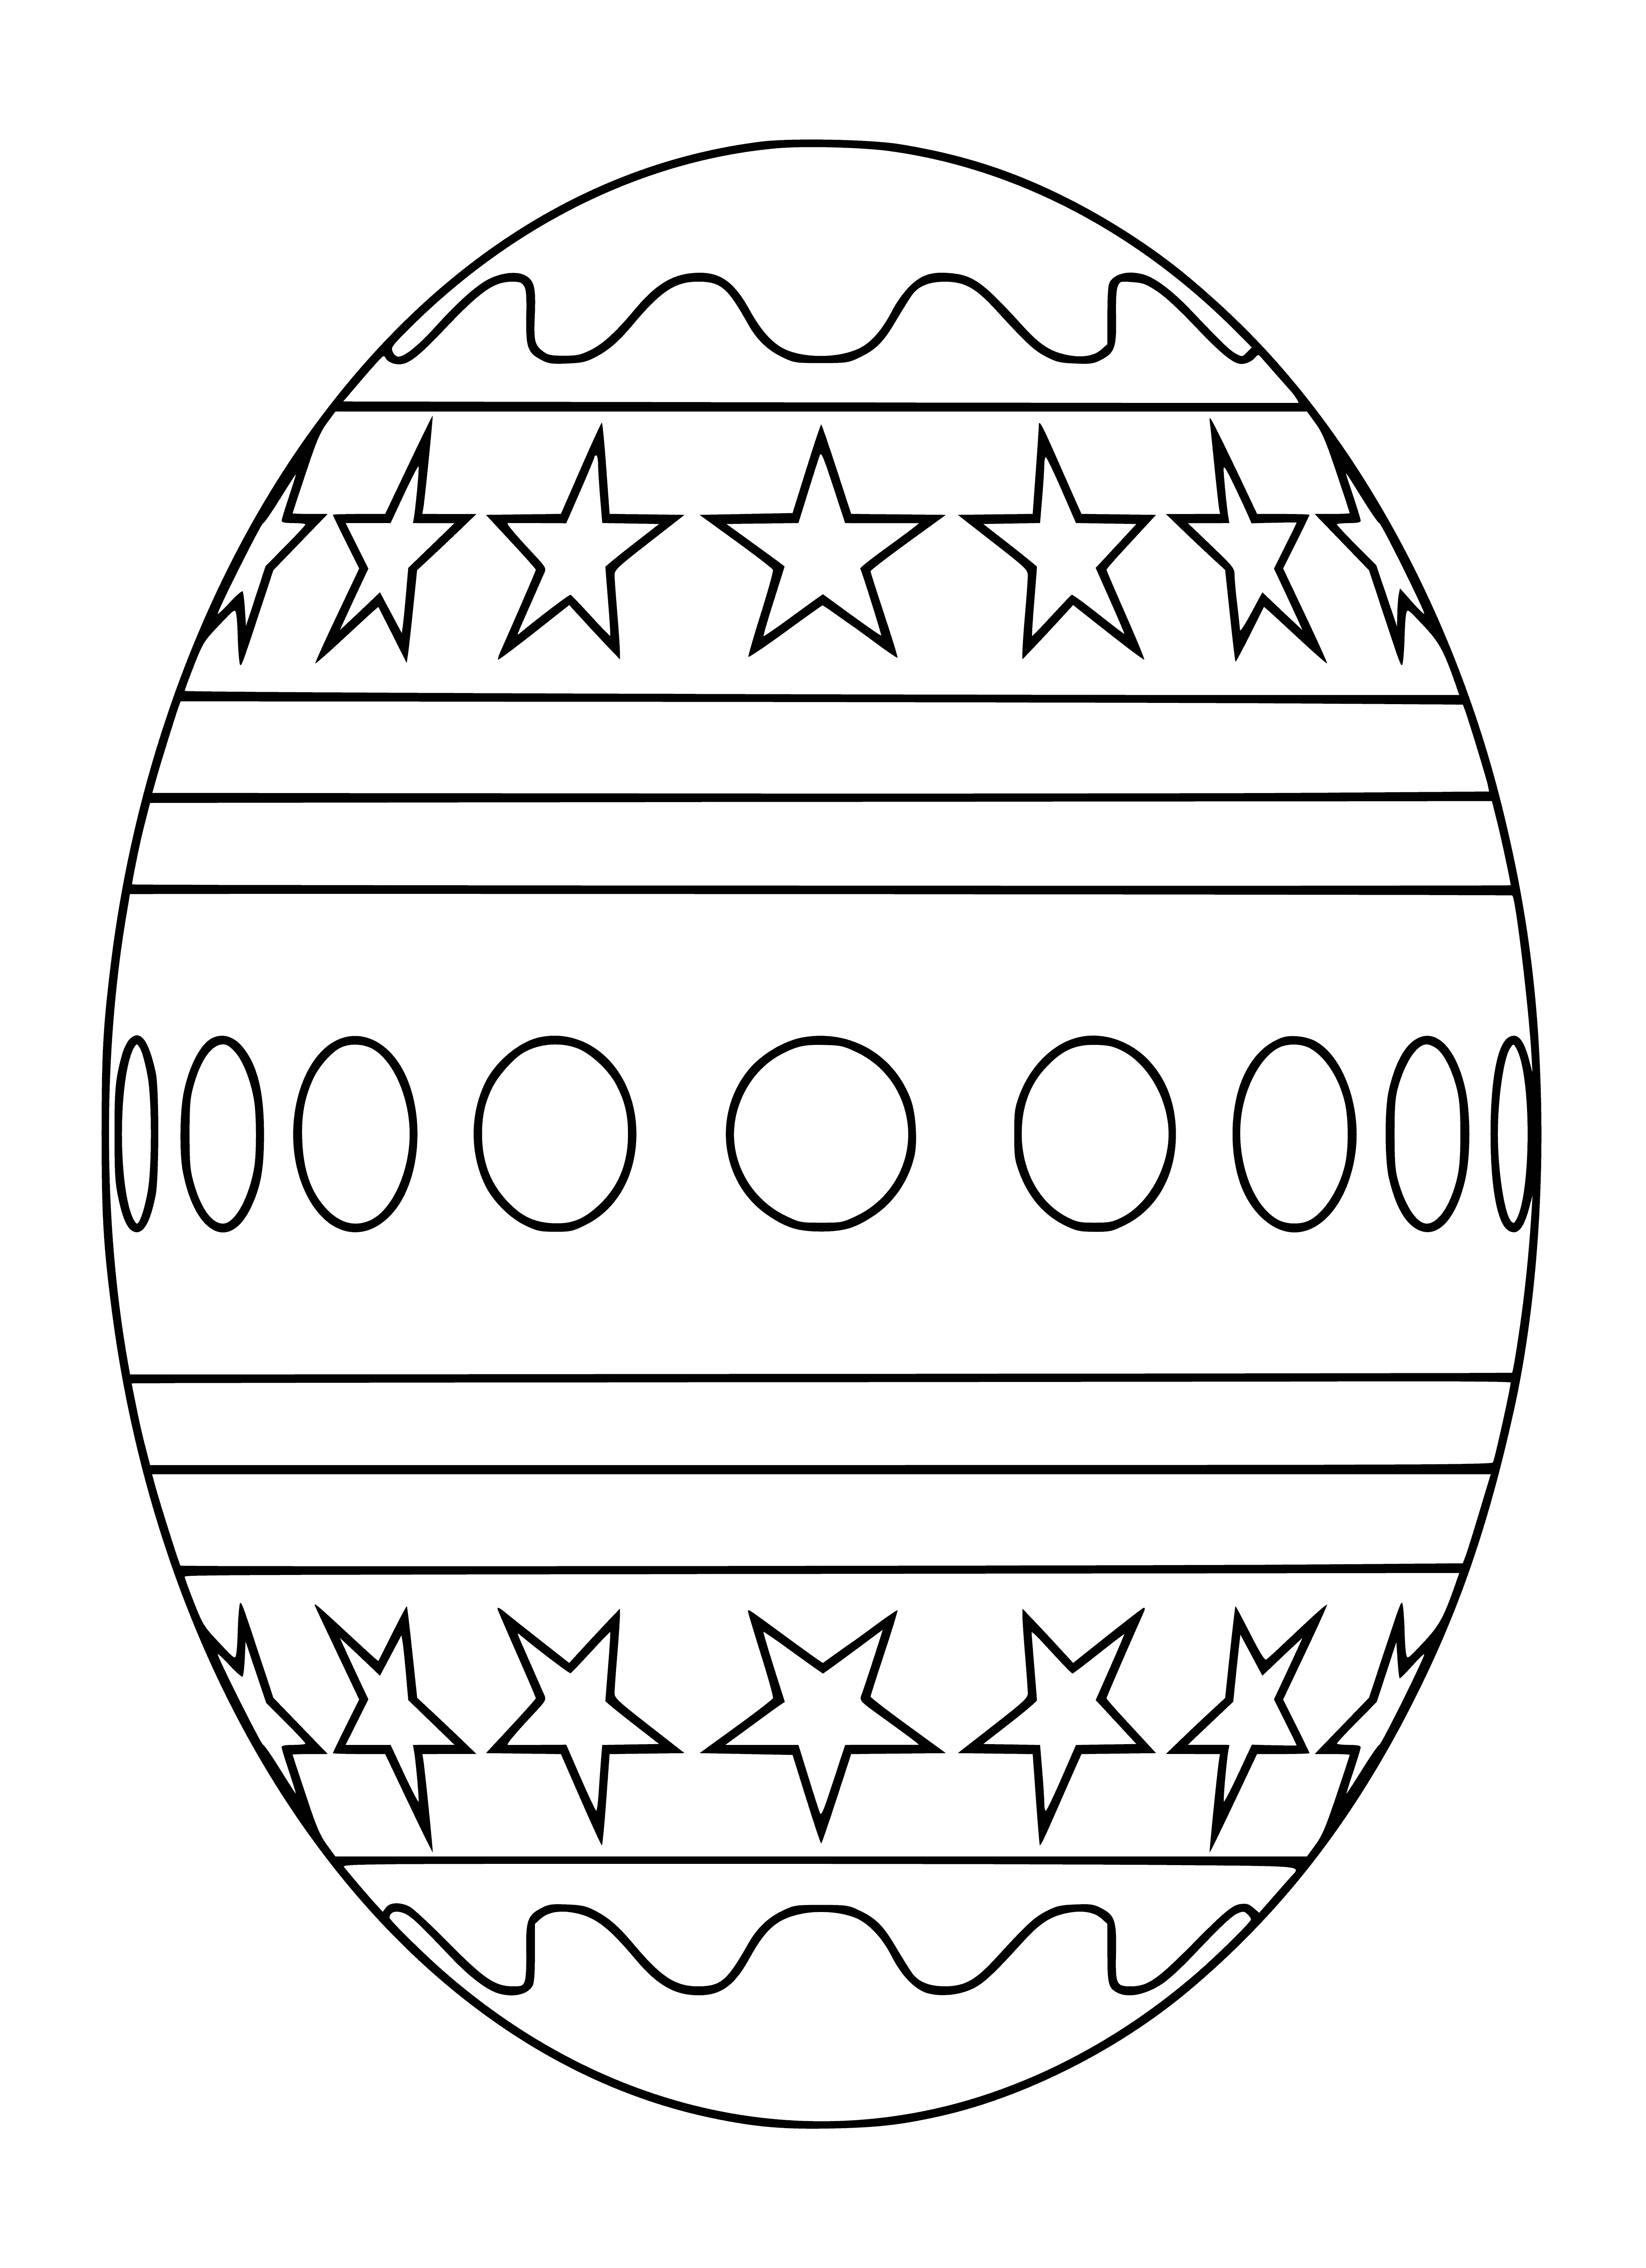 coloring page: Basket of 7 Easter eggs: 6 brown, 1 white, all with unique designs. #Easter